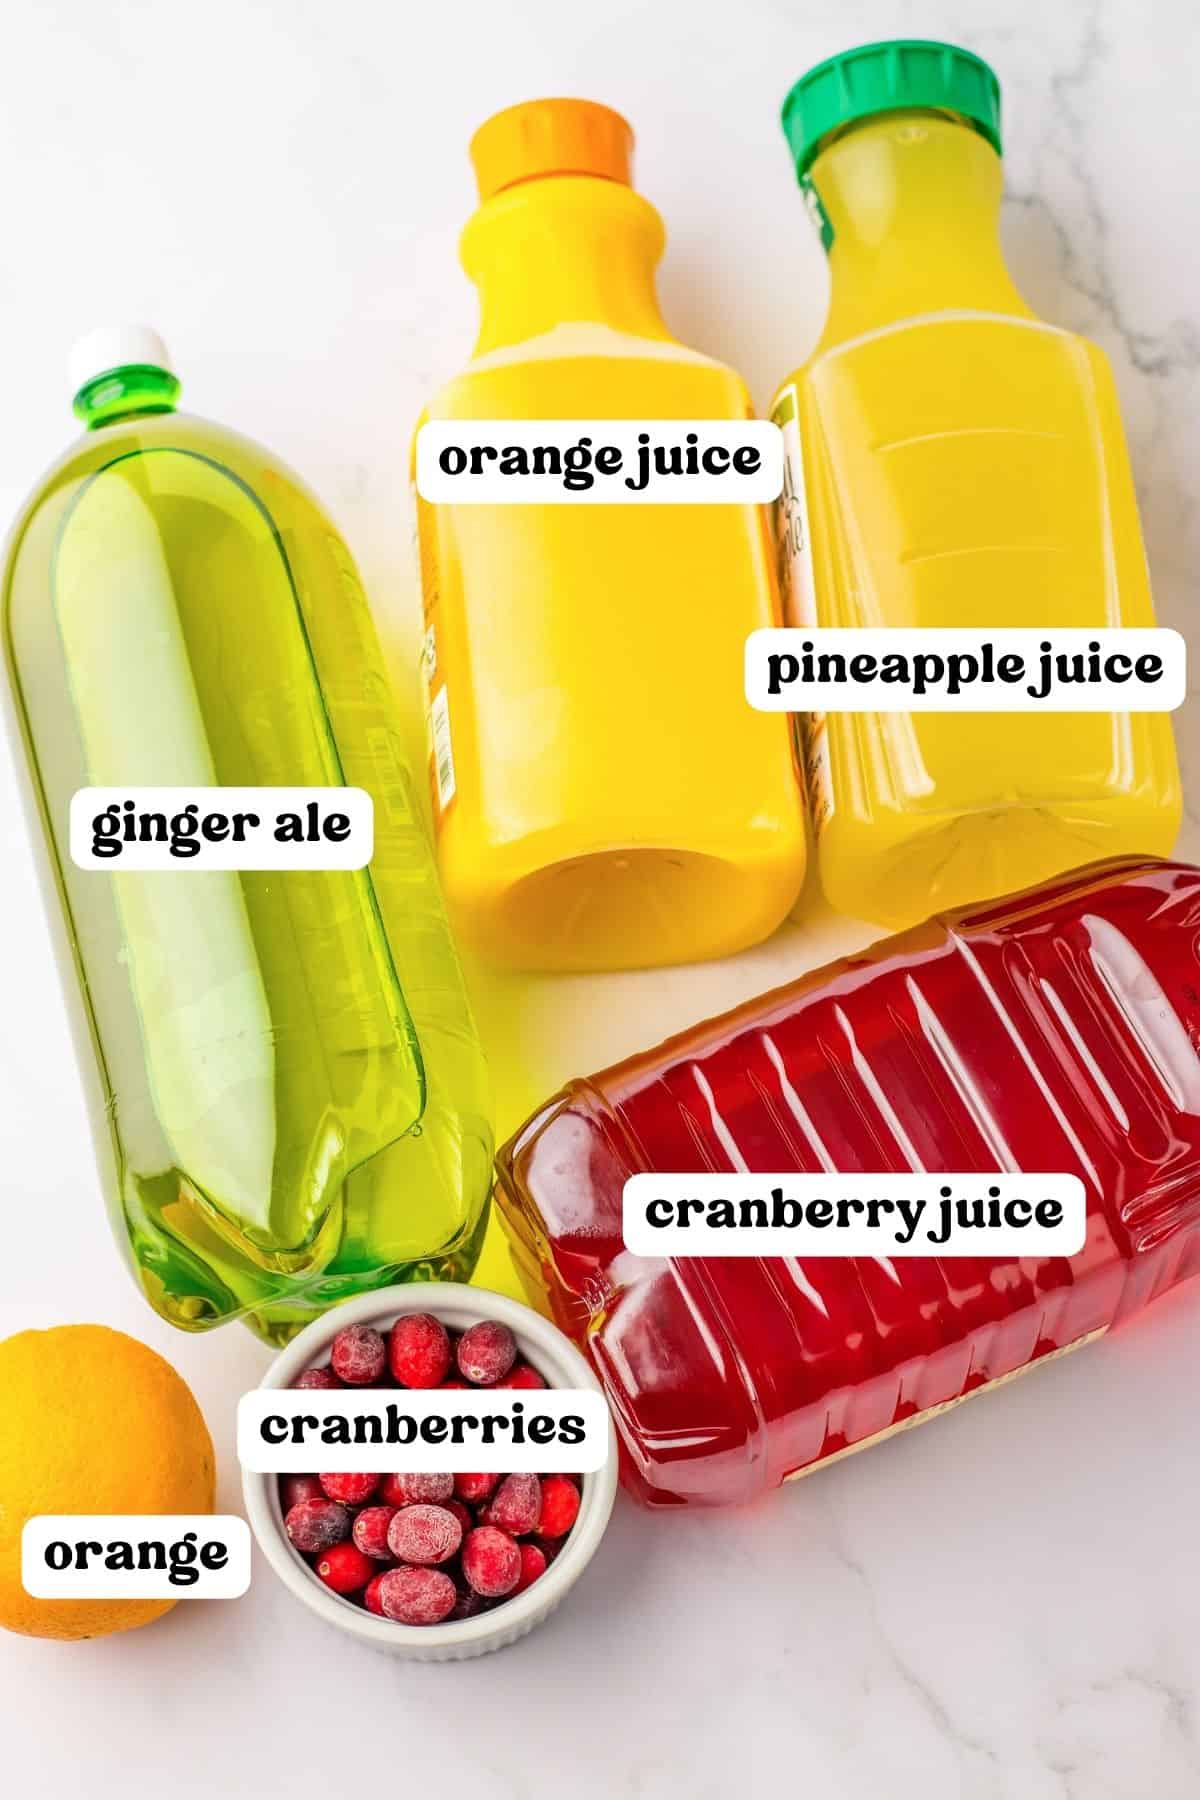 Bottles of orange juice, pineapple juice, cranberry juice, and ginger ale along with fresh cranberries and an orange.